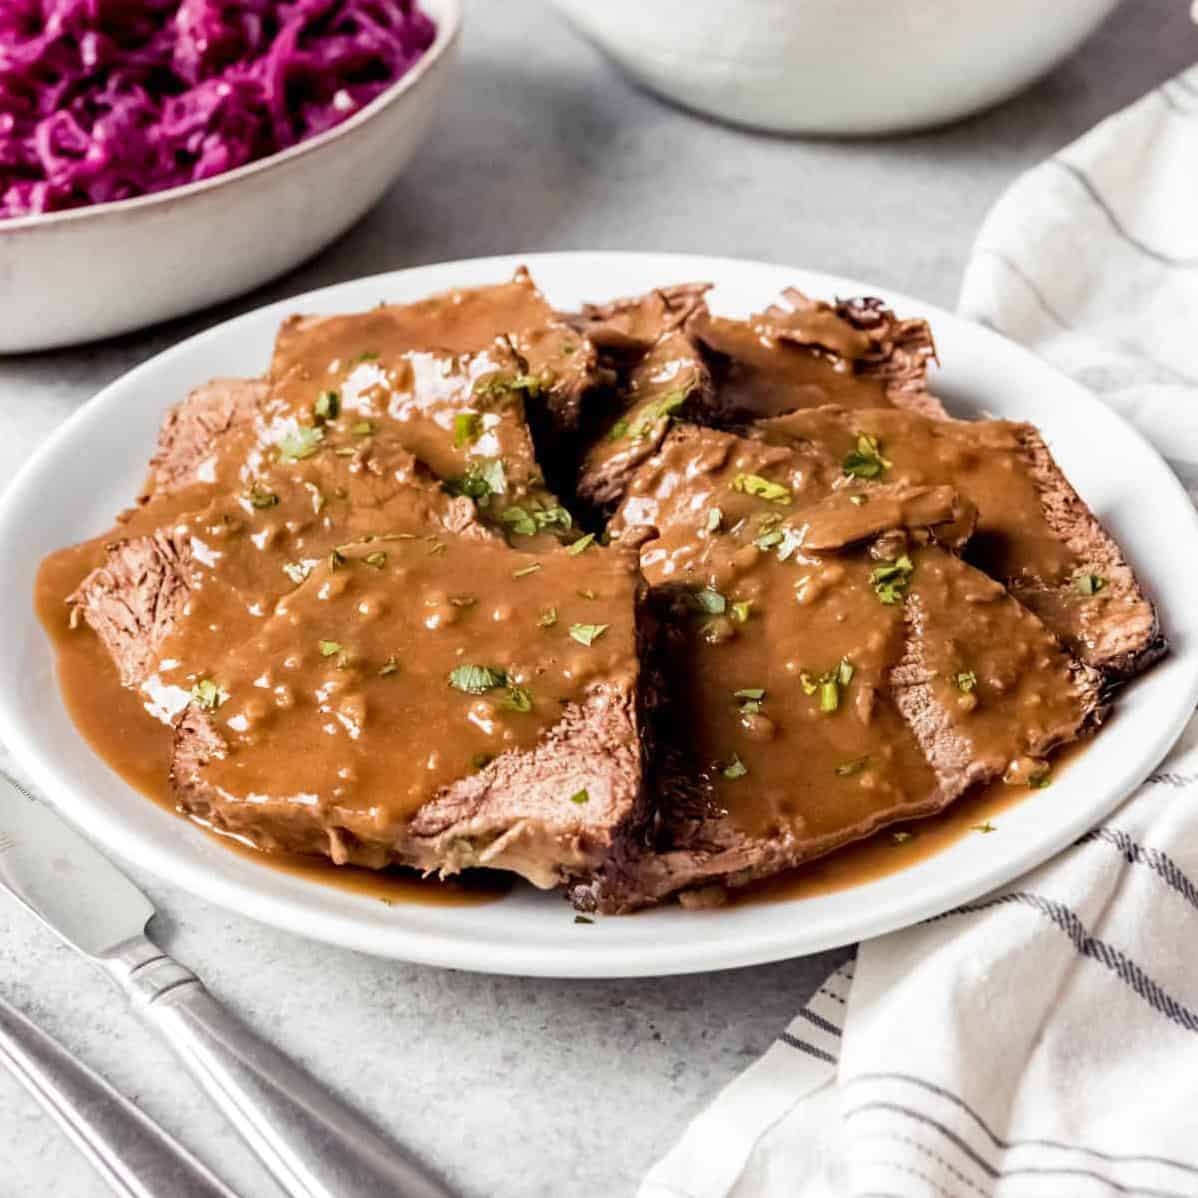  Cut yourself a thick slice of this delicious roast-top round sauerbraten and savor every bite.